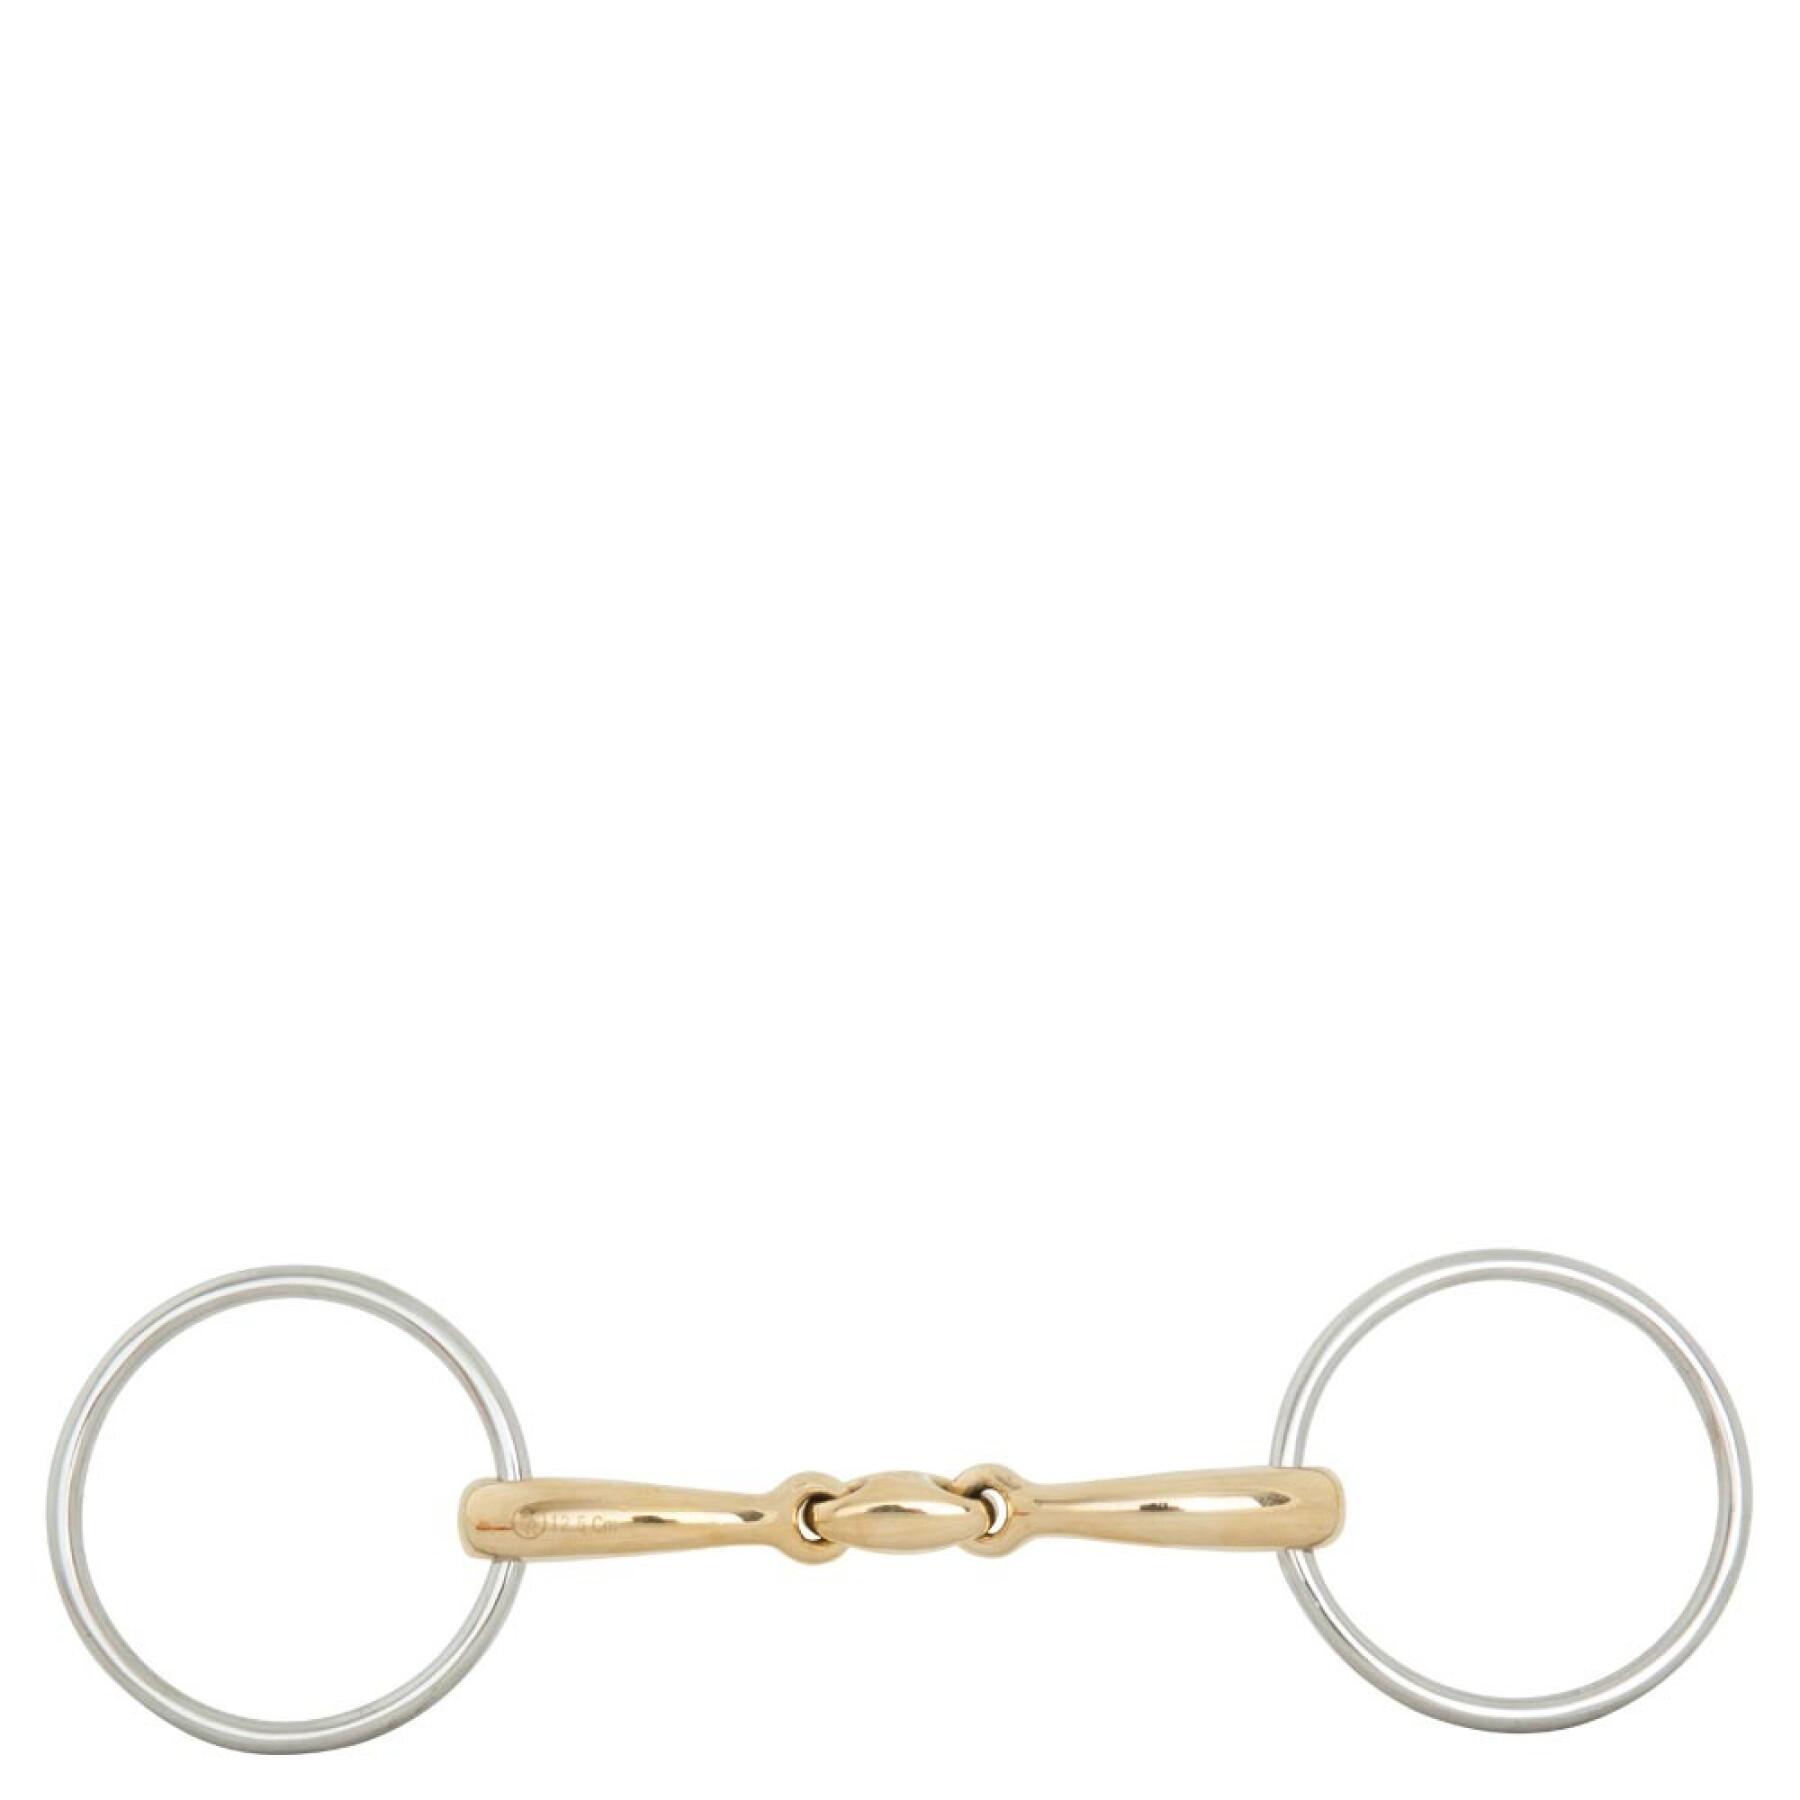 3-Ring Gebiss BR Equitation Soft Contact